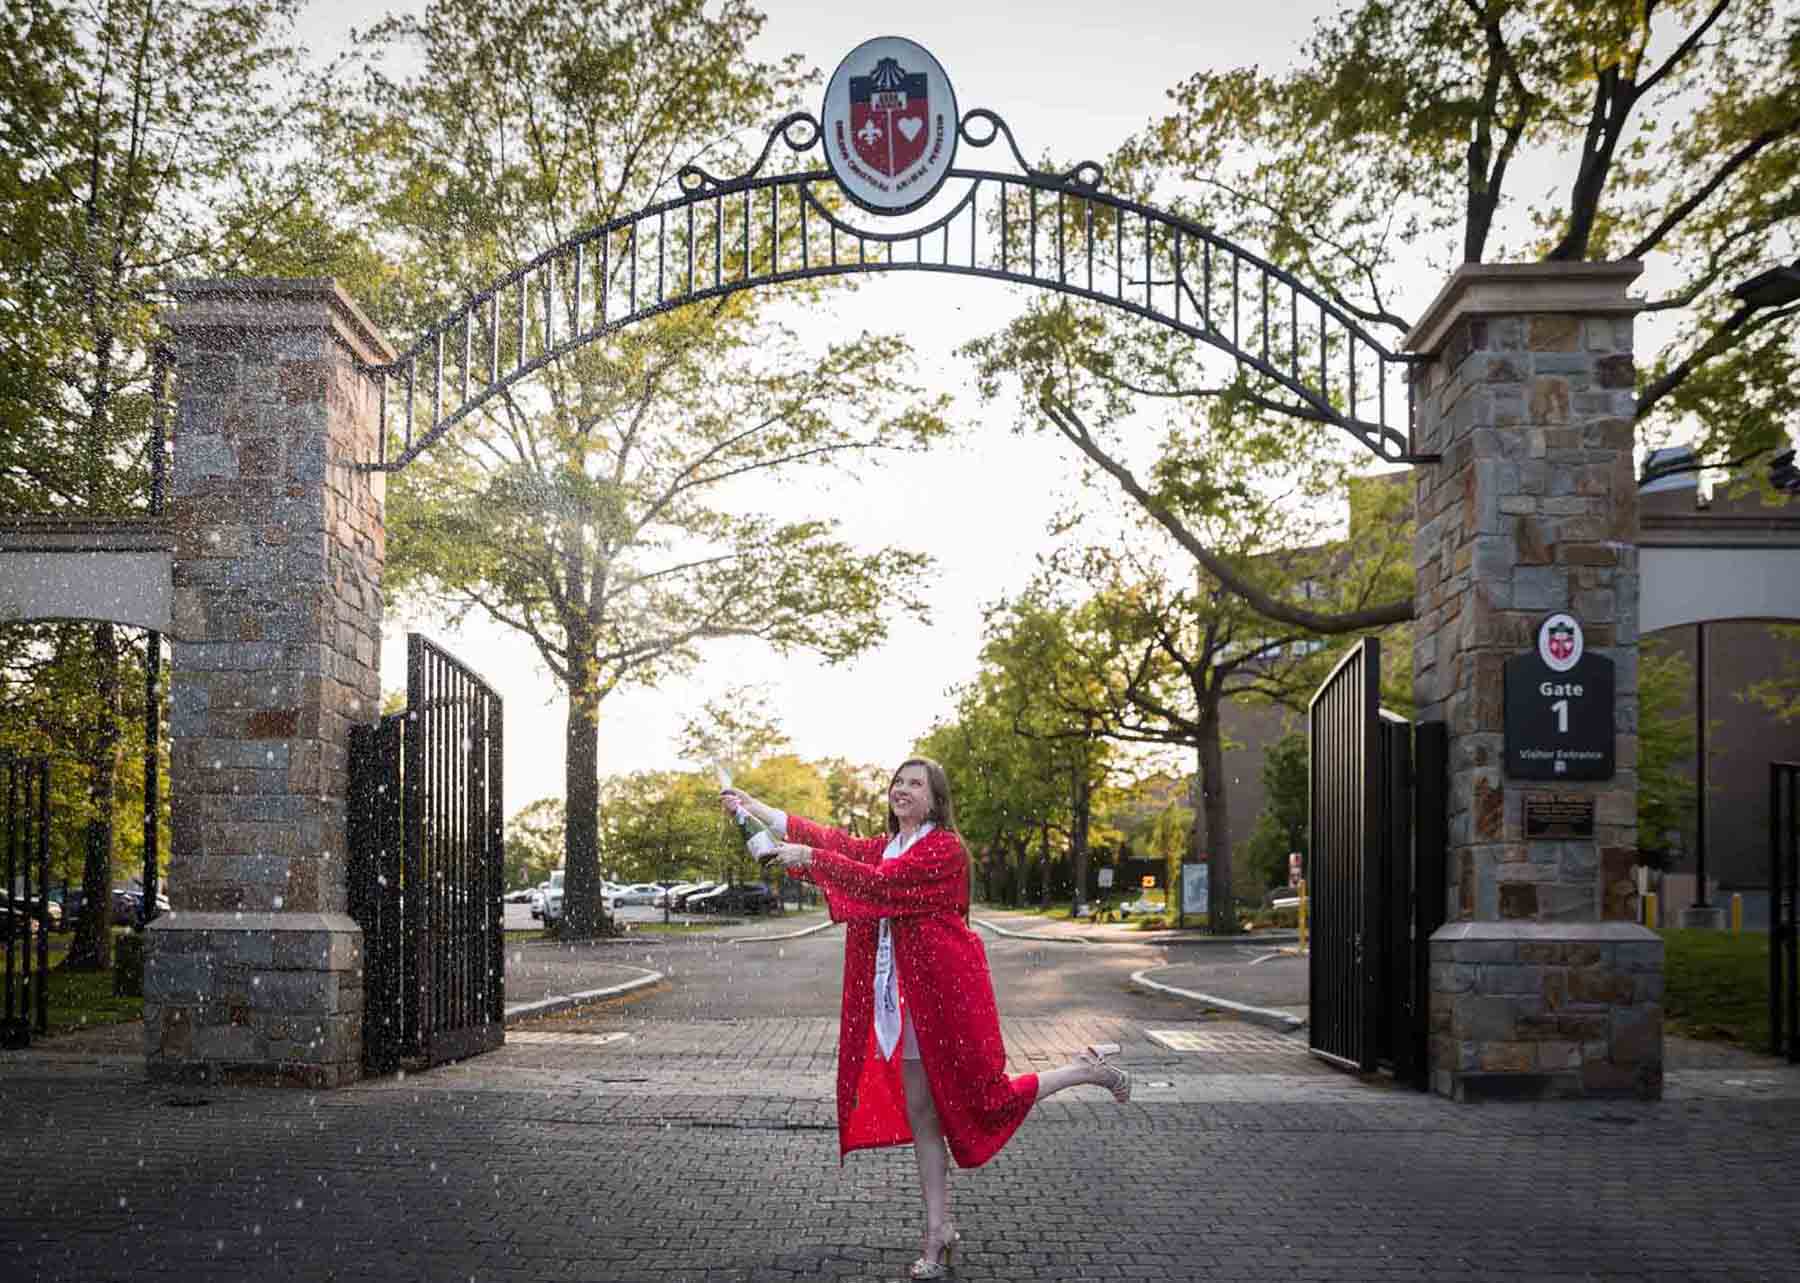 Female graduate wearing red robe and white sash spraying champagne bottle under gate during a St. John’s University graduate portrait session